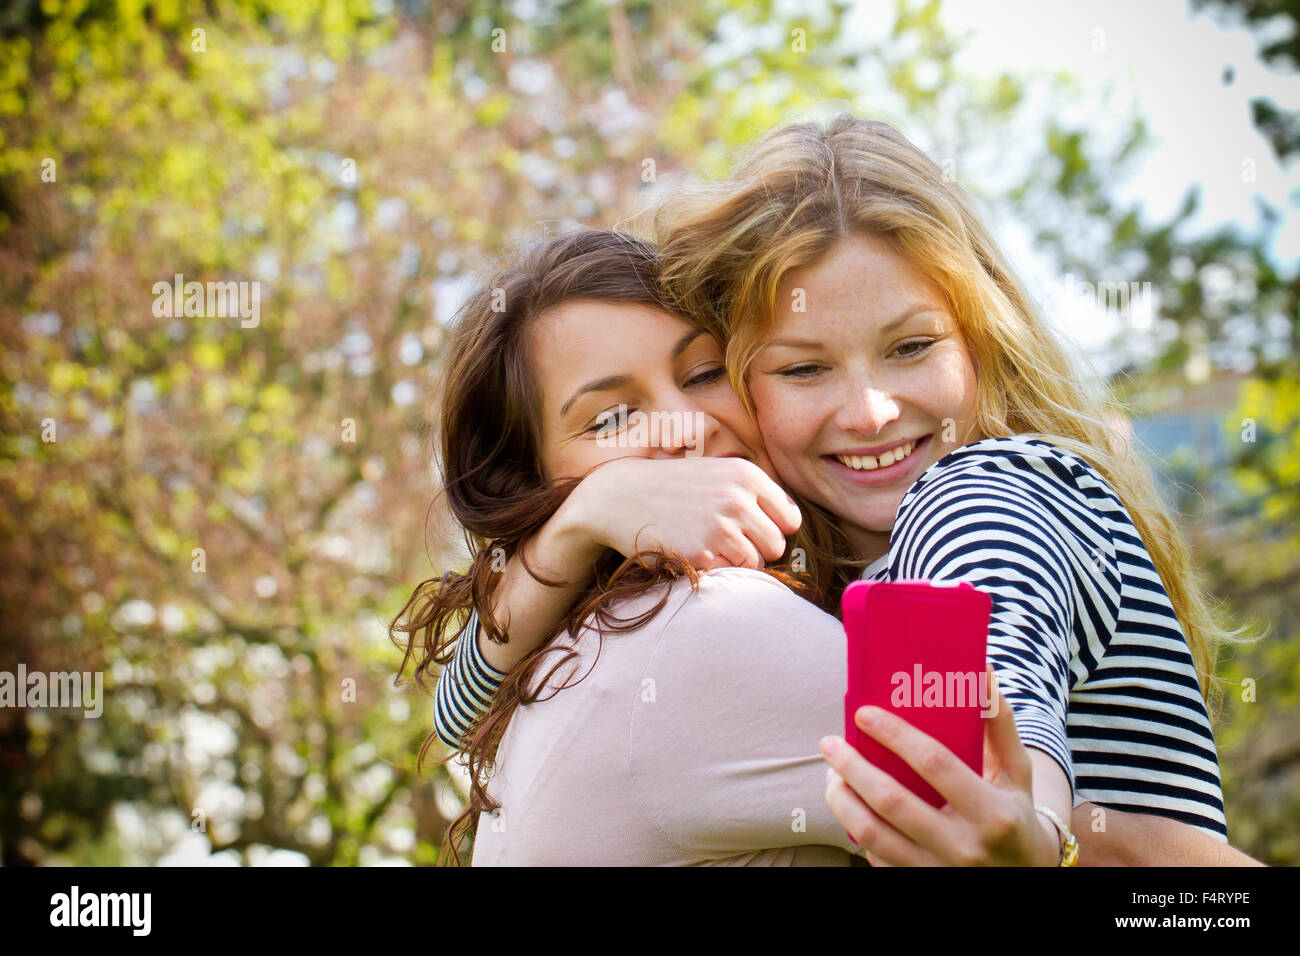 Taking Selfie with Smartphone Stock Photo